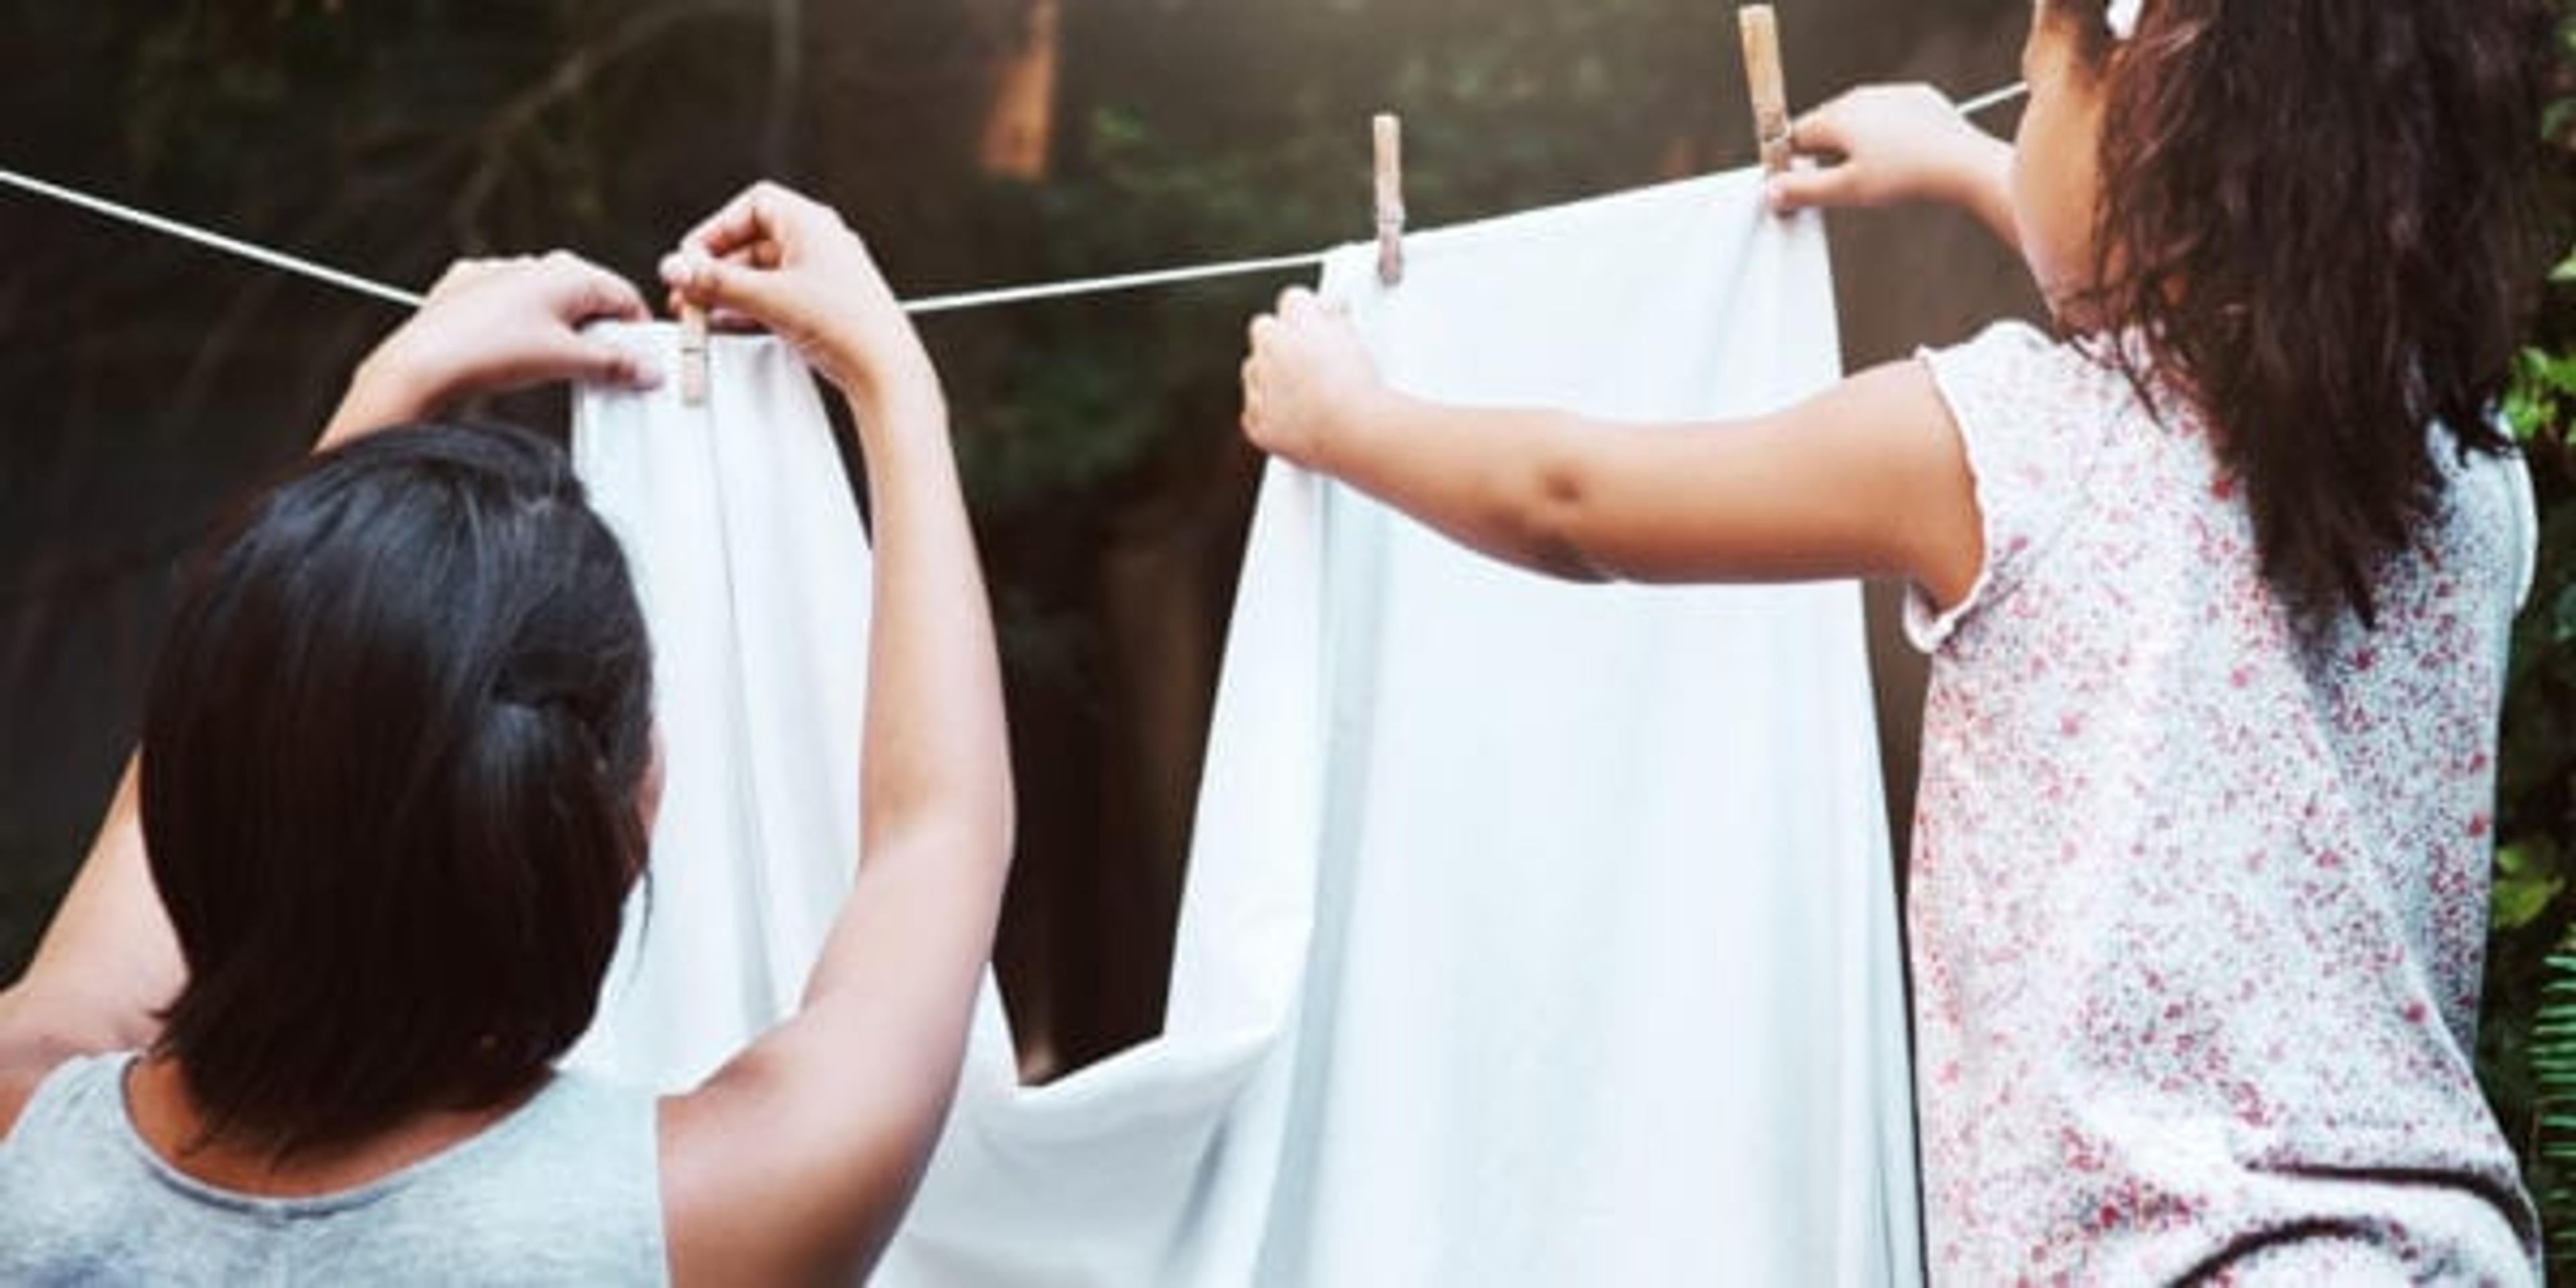 Shot of a mother and her little daughter hanging up laundry on a washing line outdoors